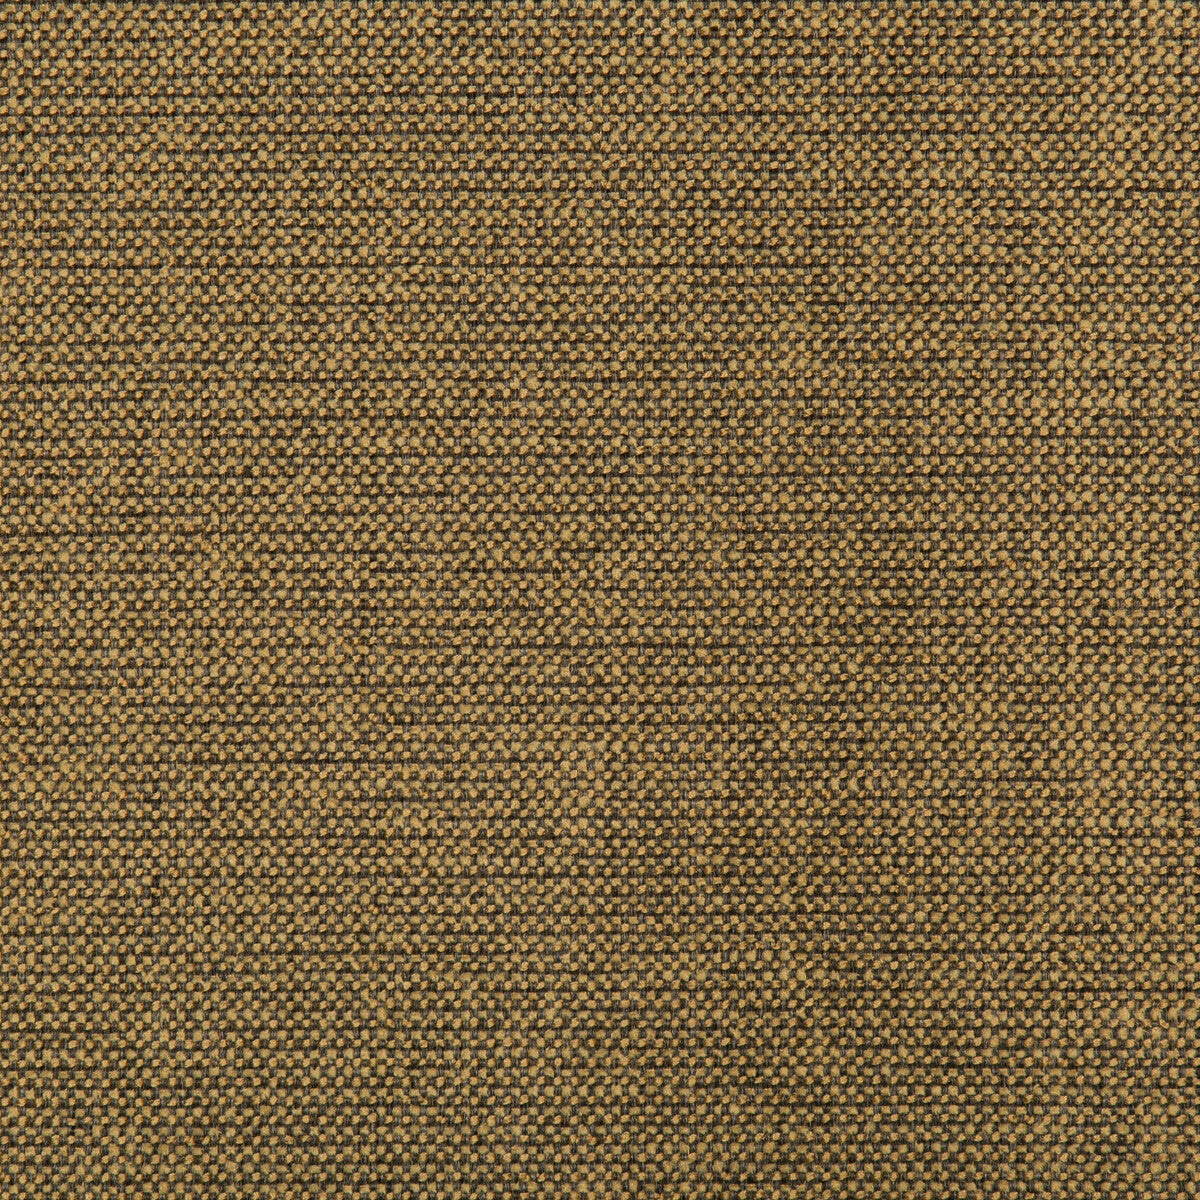 Burr fabric in gold rush color - pattern 35745.48.0 - by Kravet Contract in the Value Kravetarmor collection